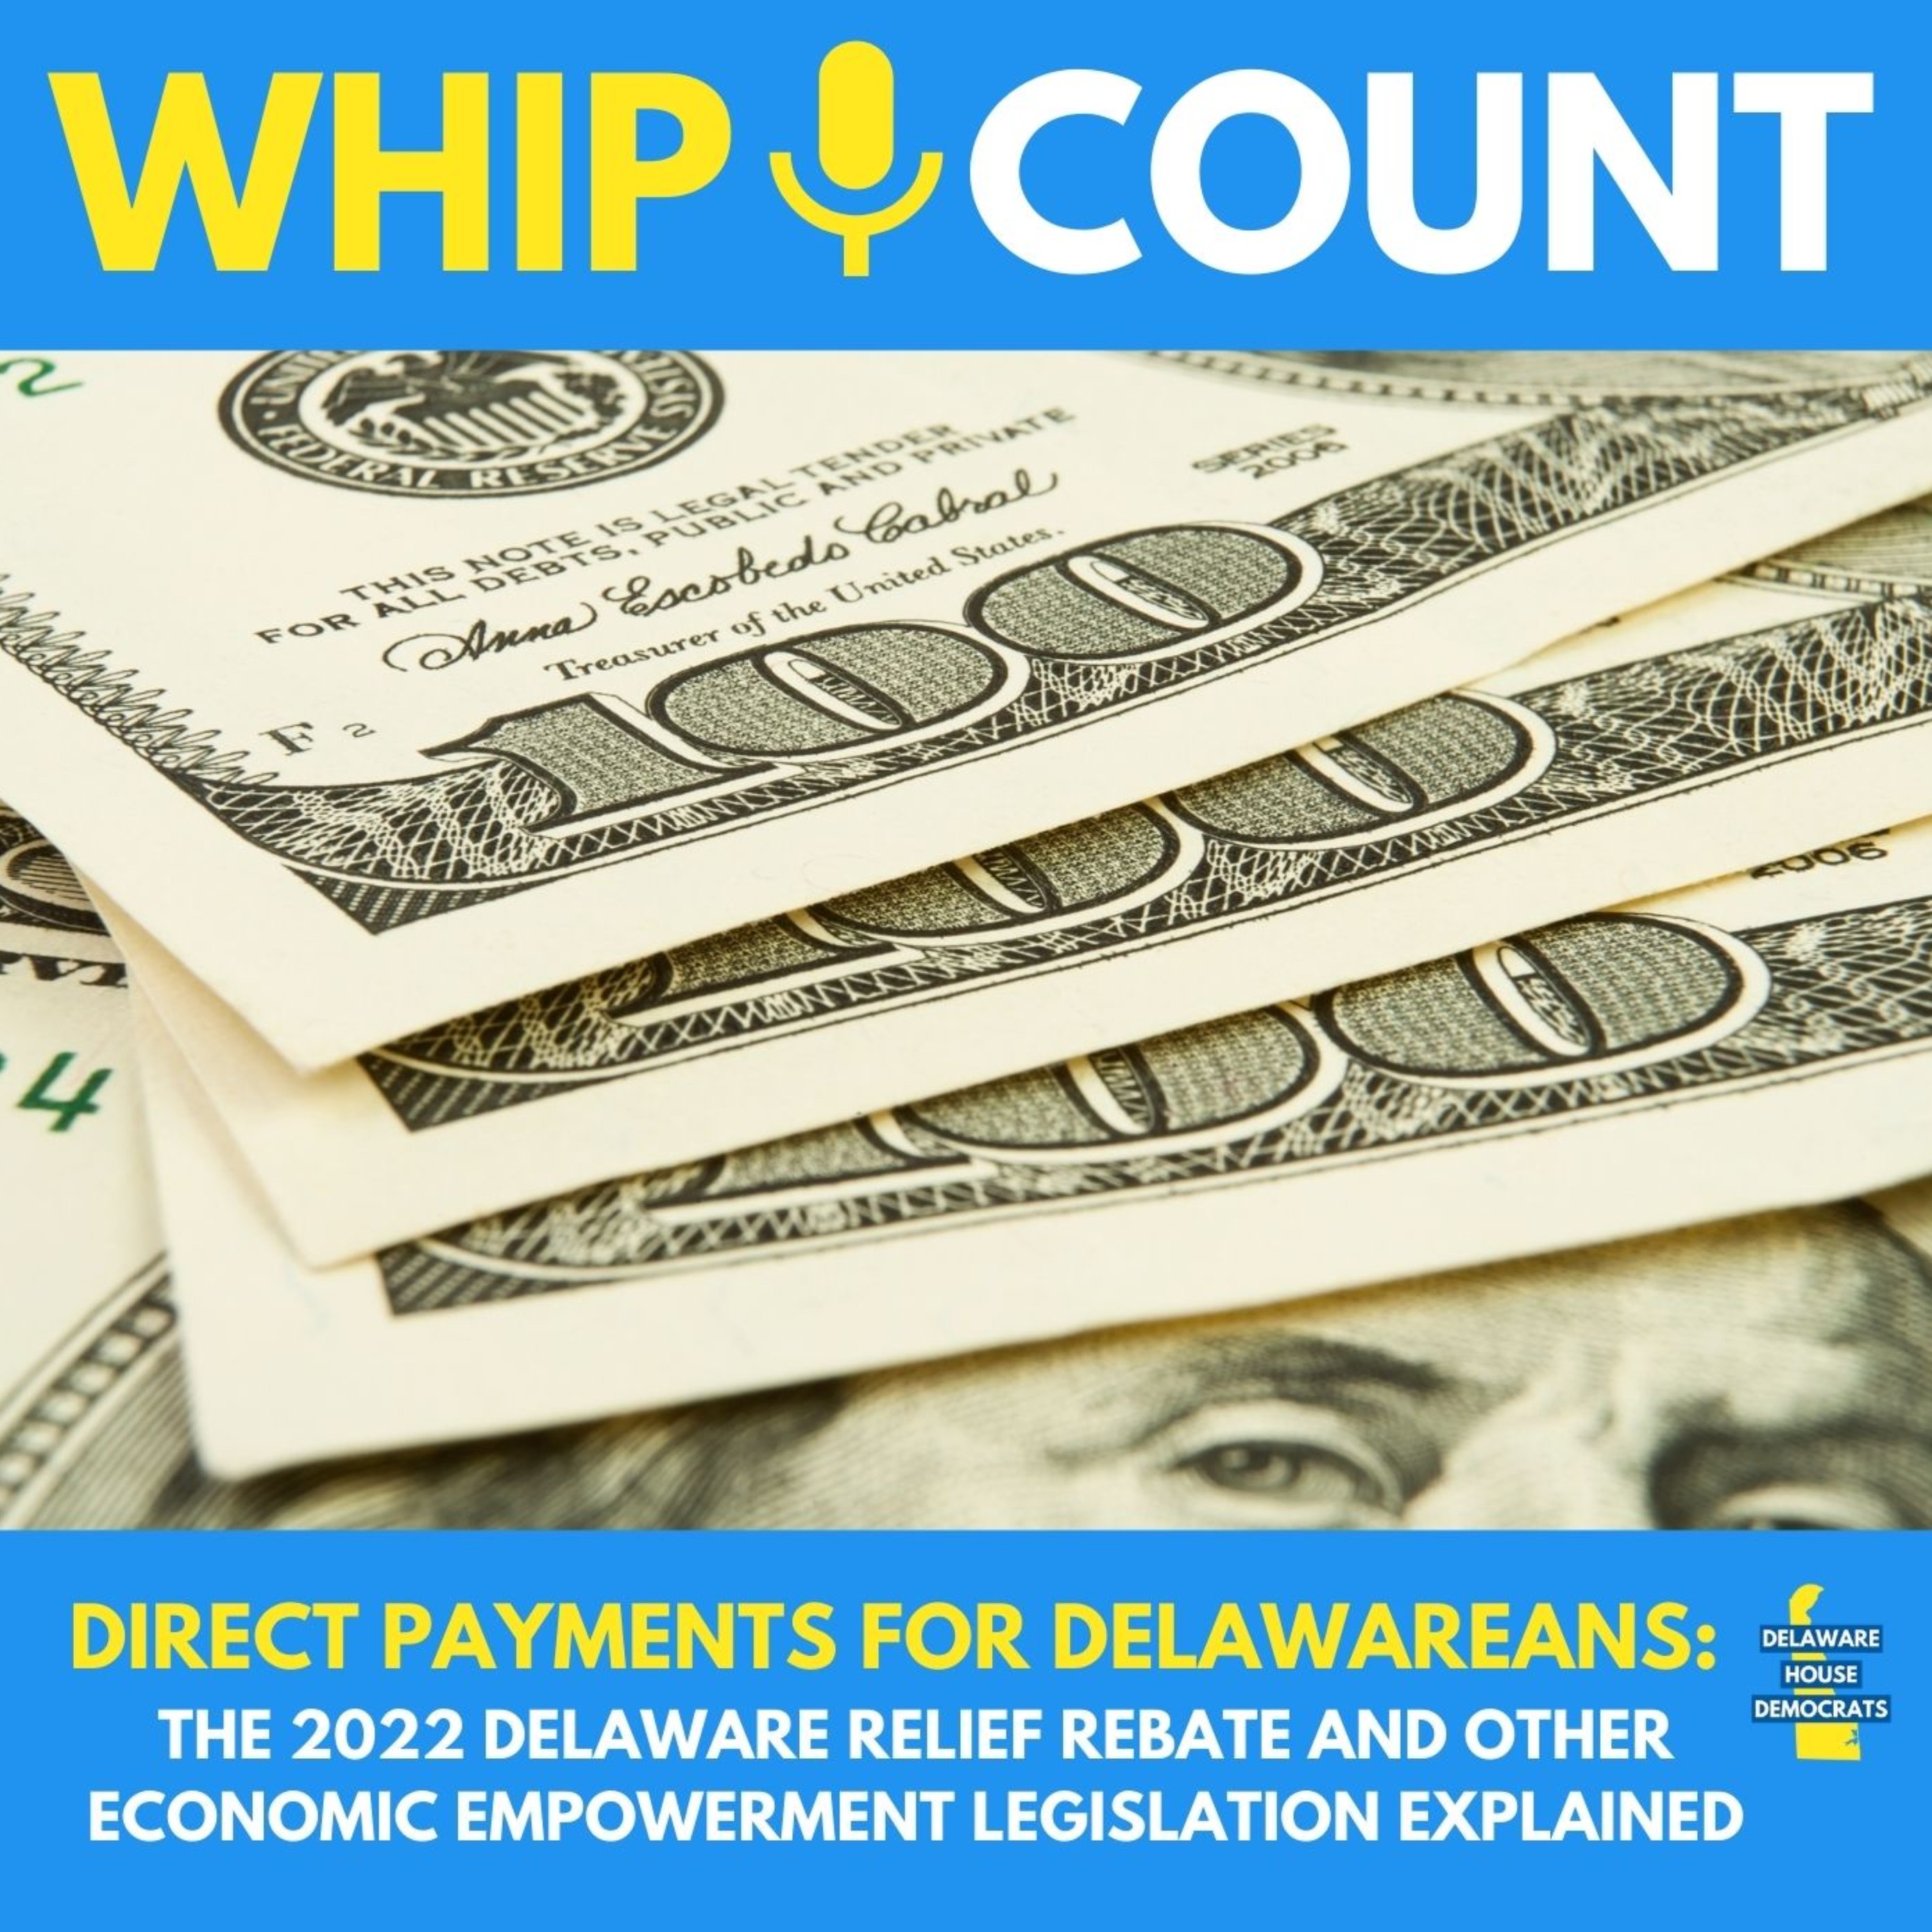 direct-payments-for-delawareans-the-2022-delaware-relief-rebate-and-other-economic-empowerment